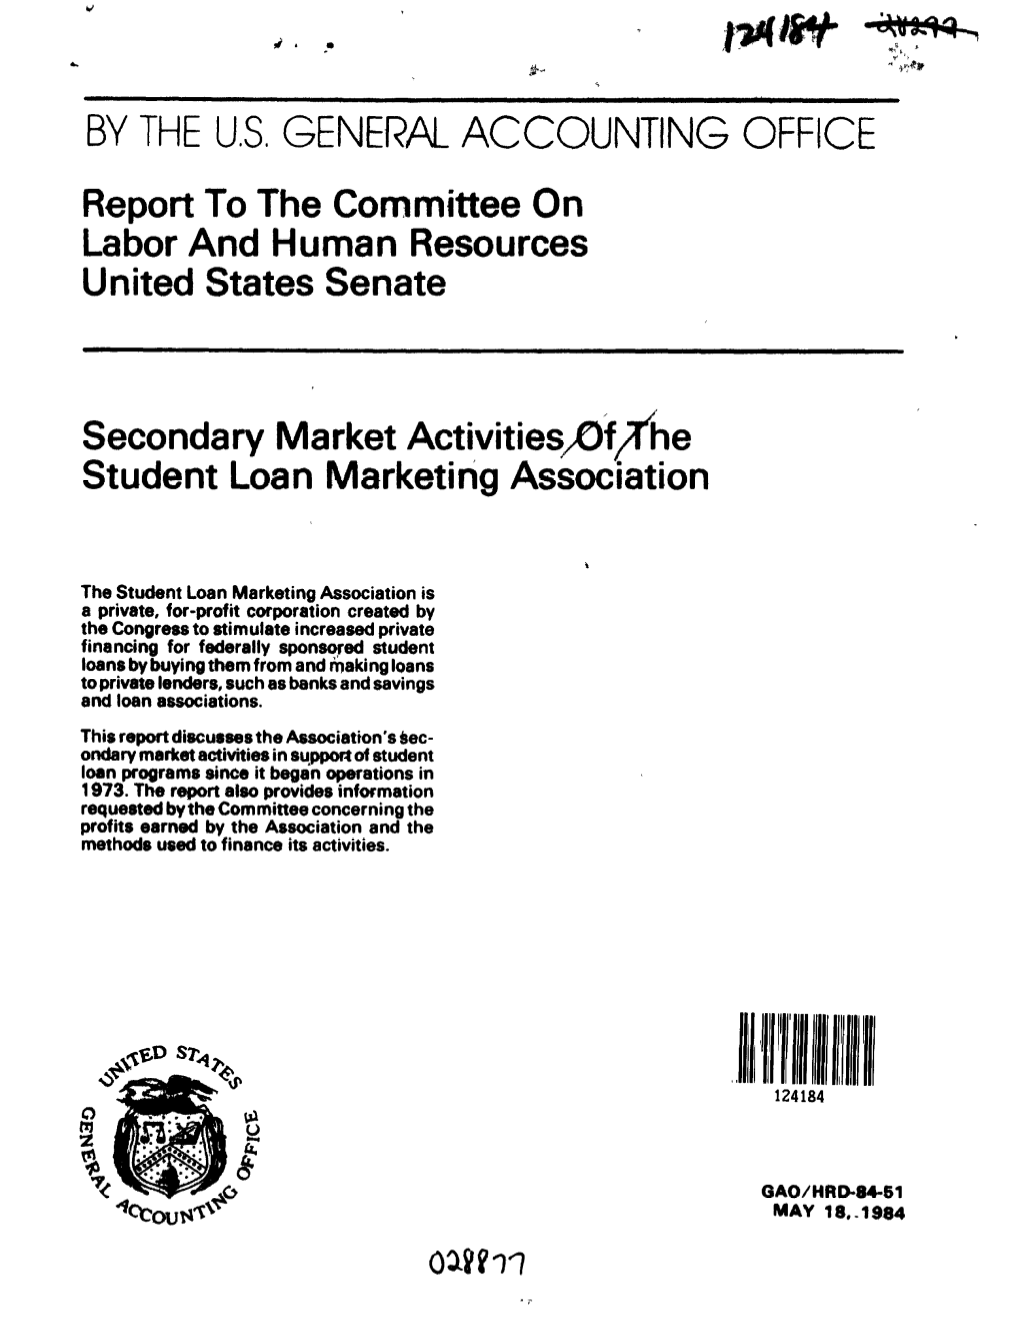 HRD-84-51 Secondary Market Activities of the Student Loan